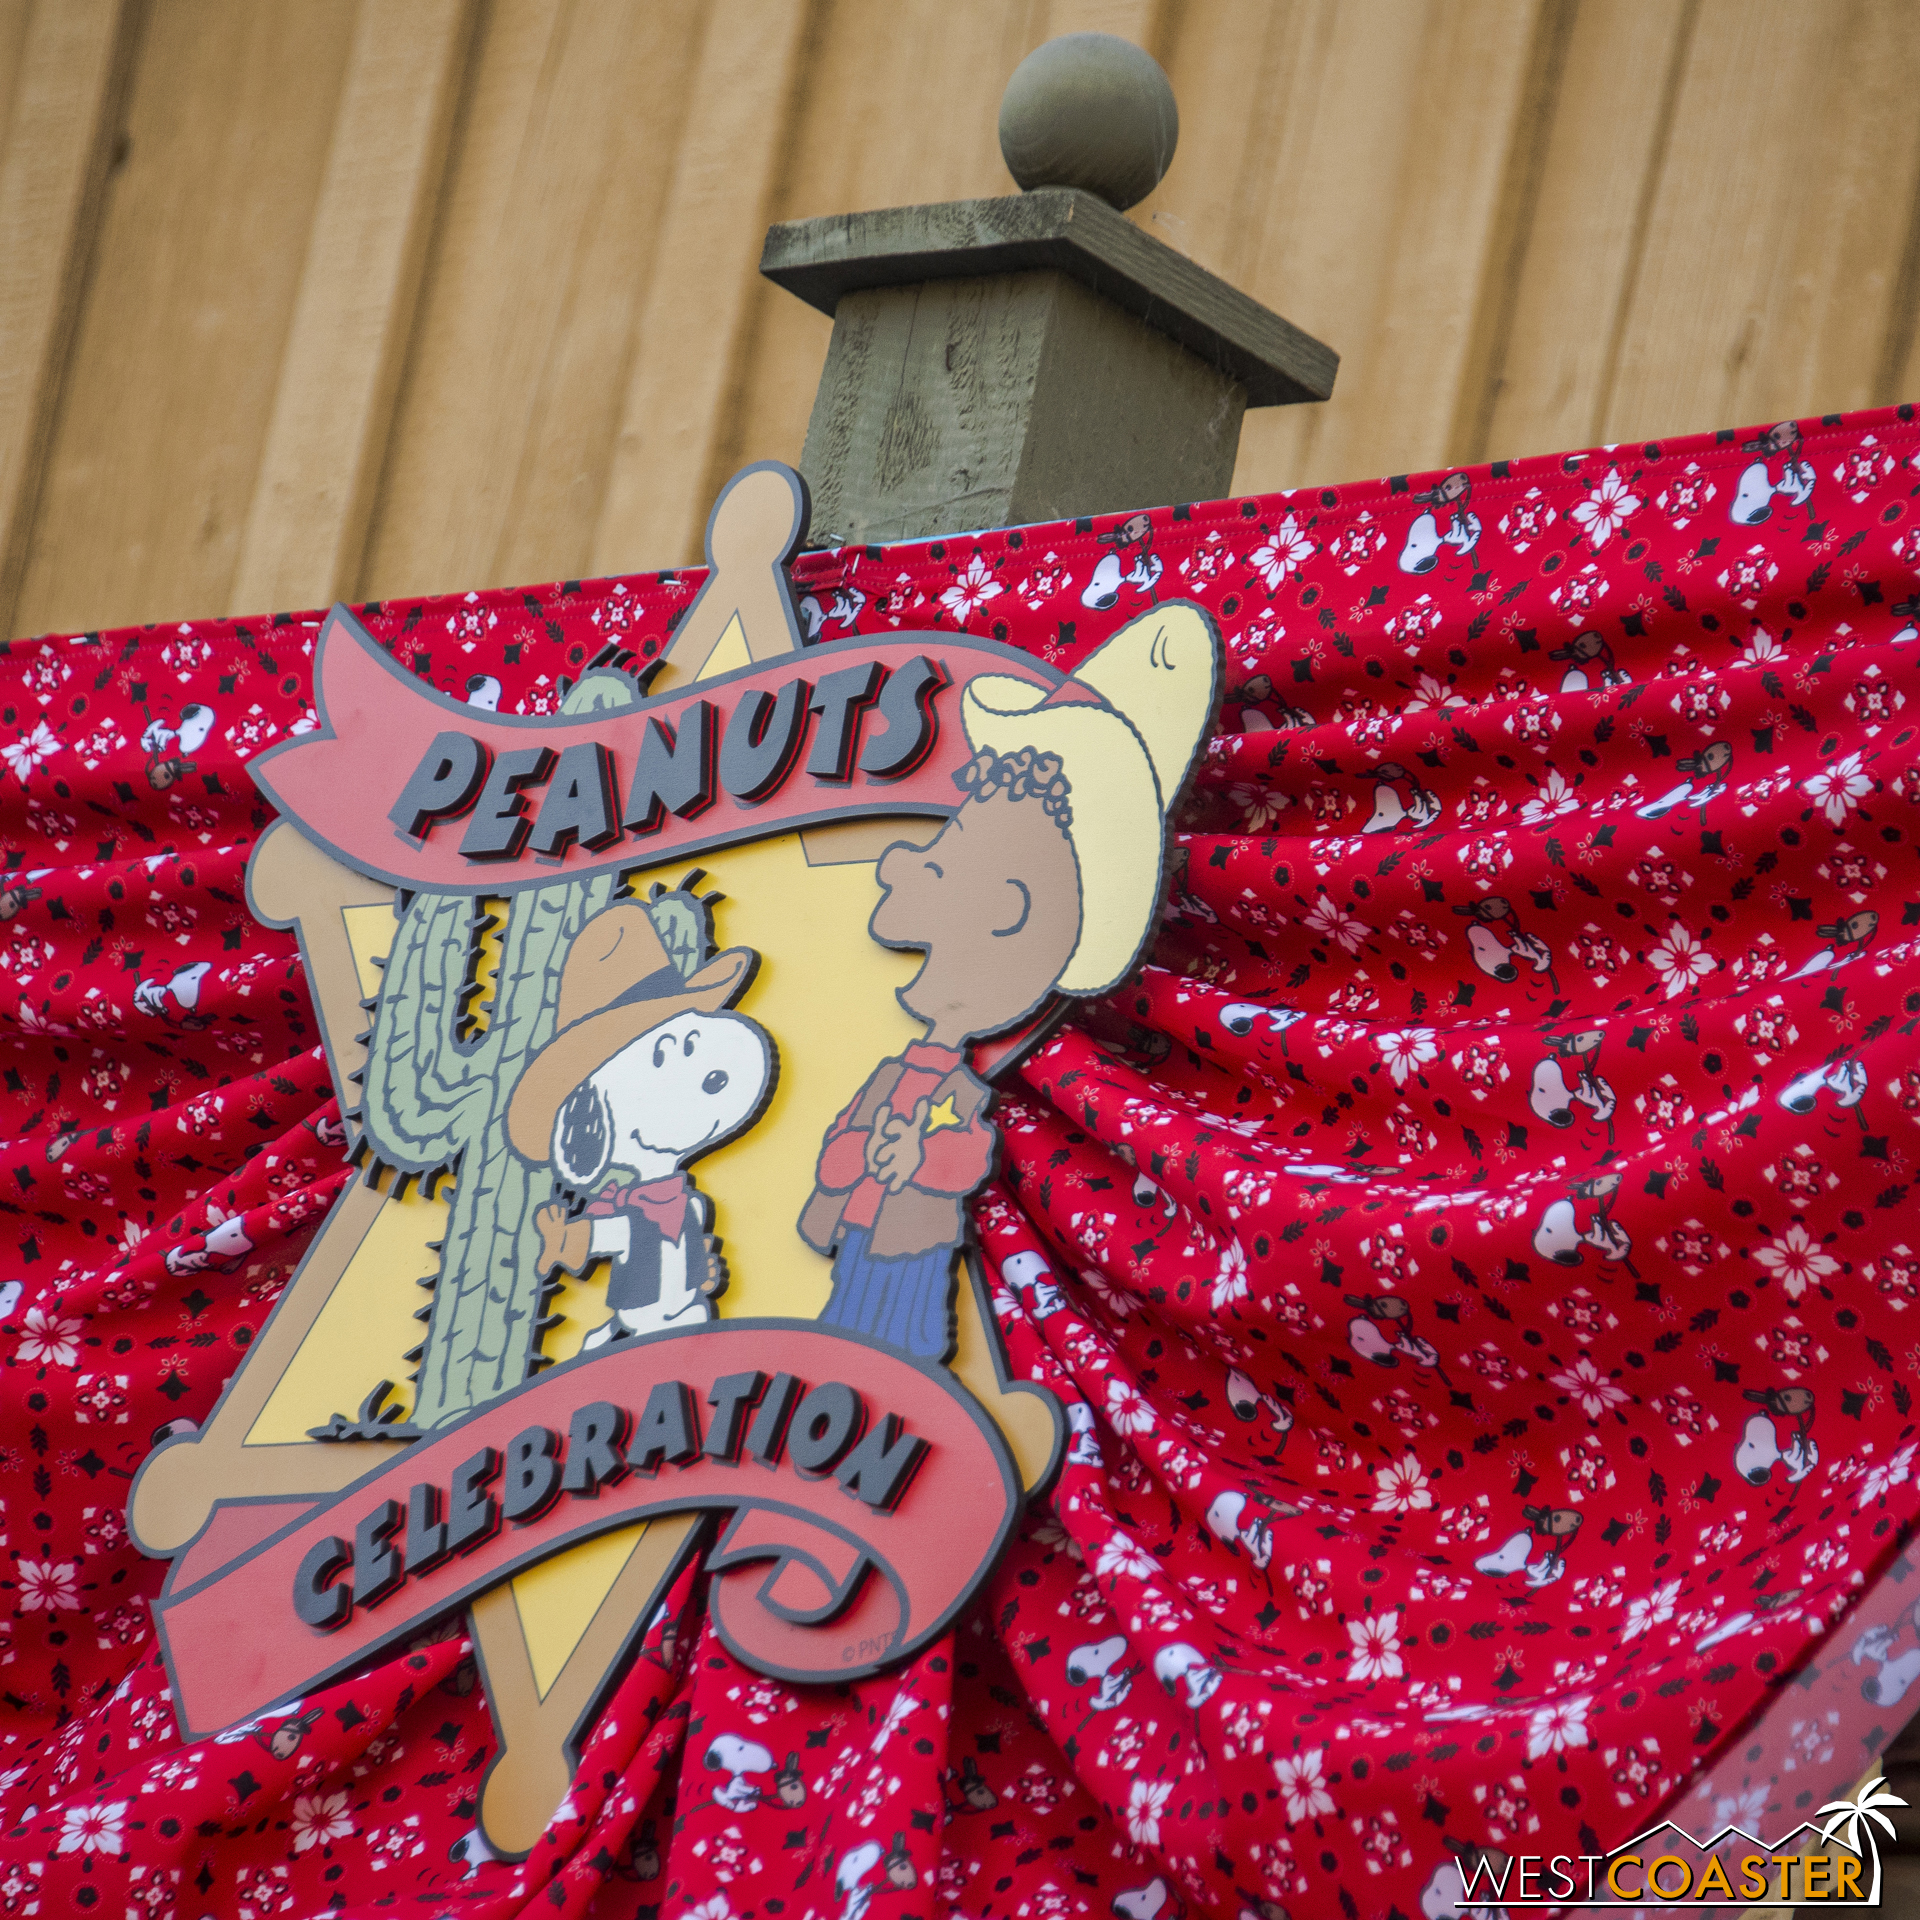  More decorations, this one in Ghost Town. 